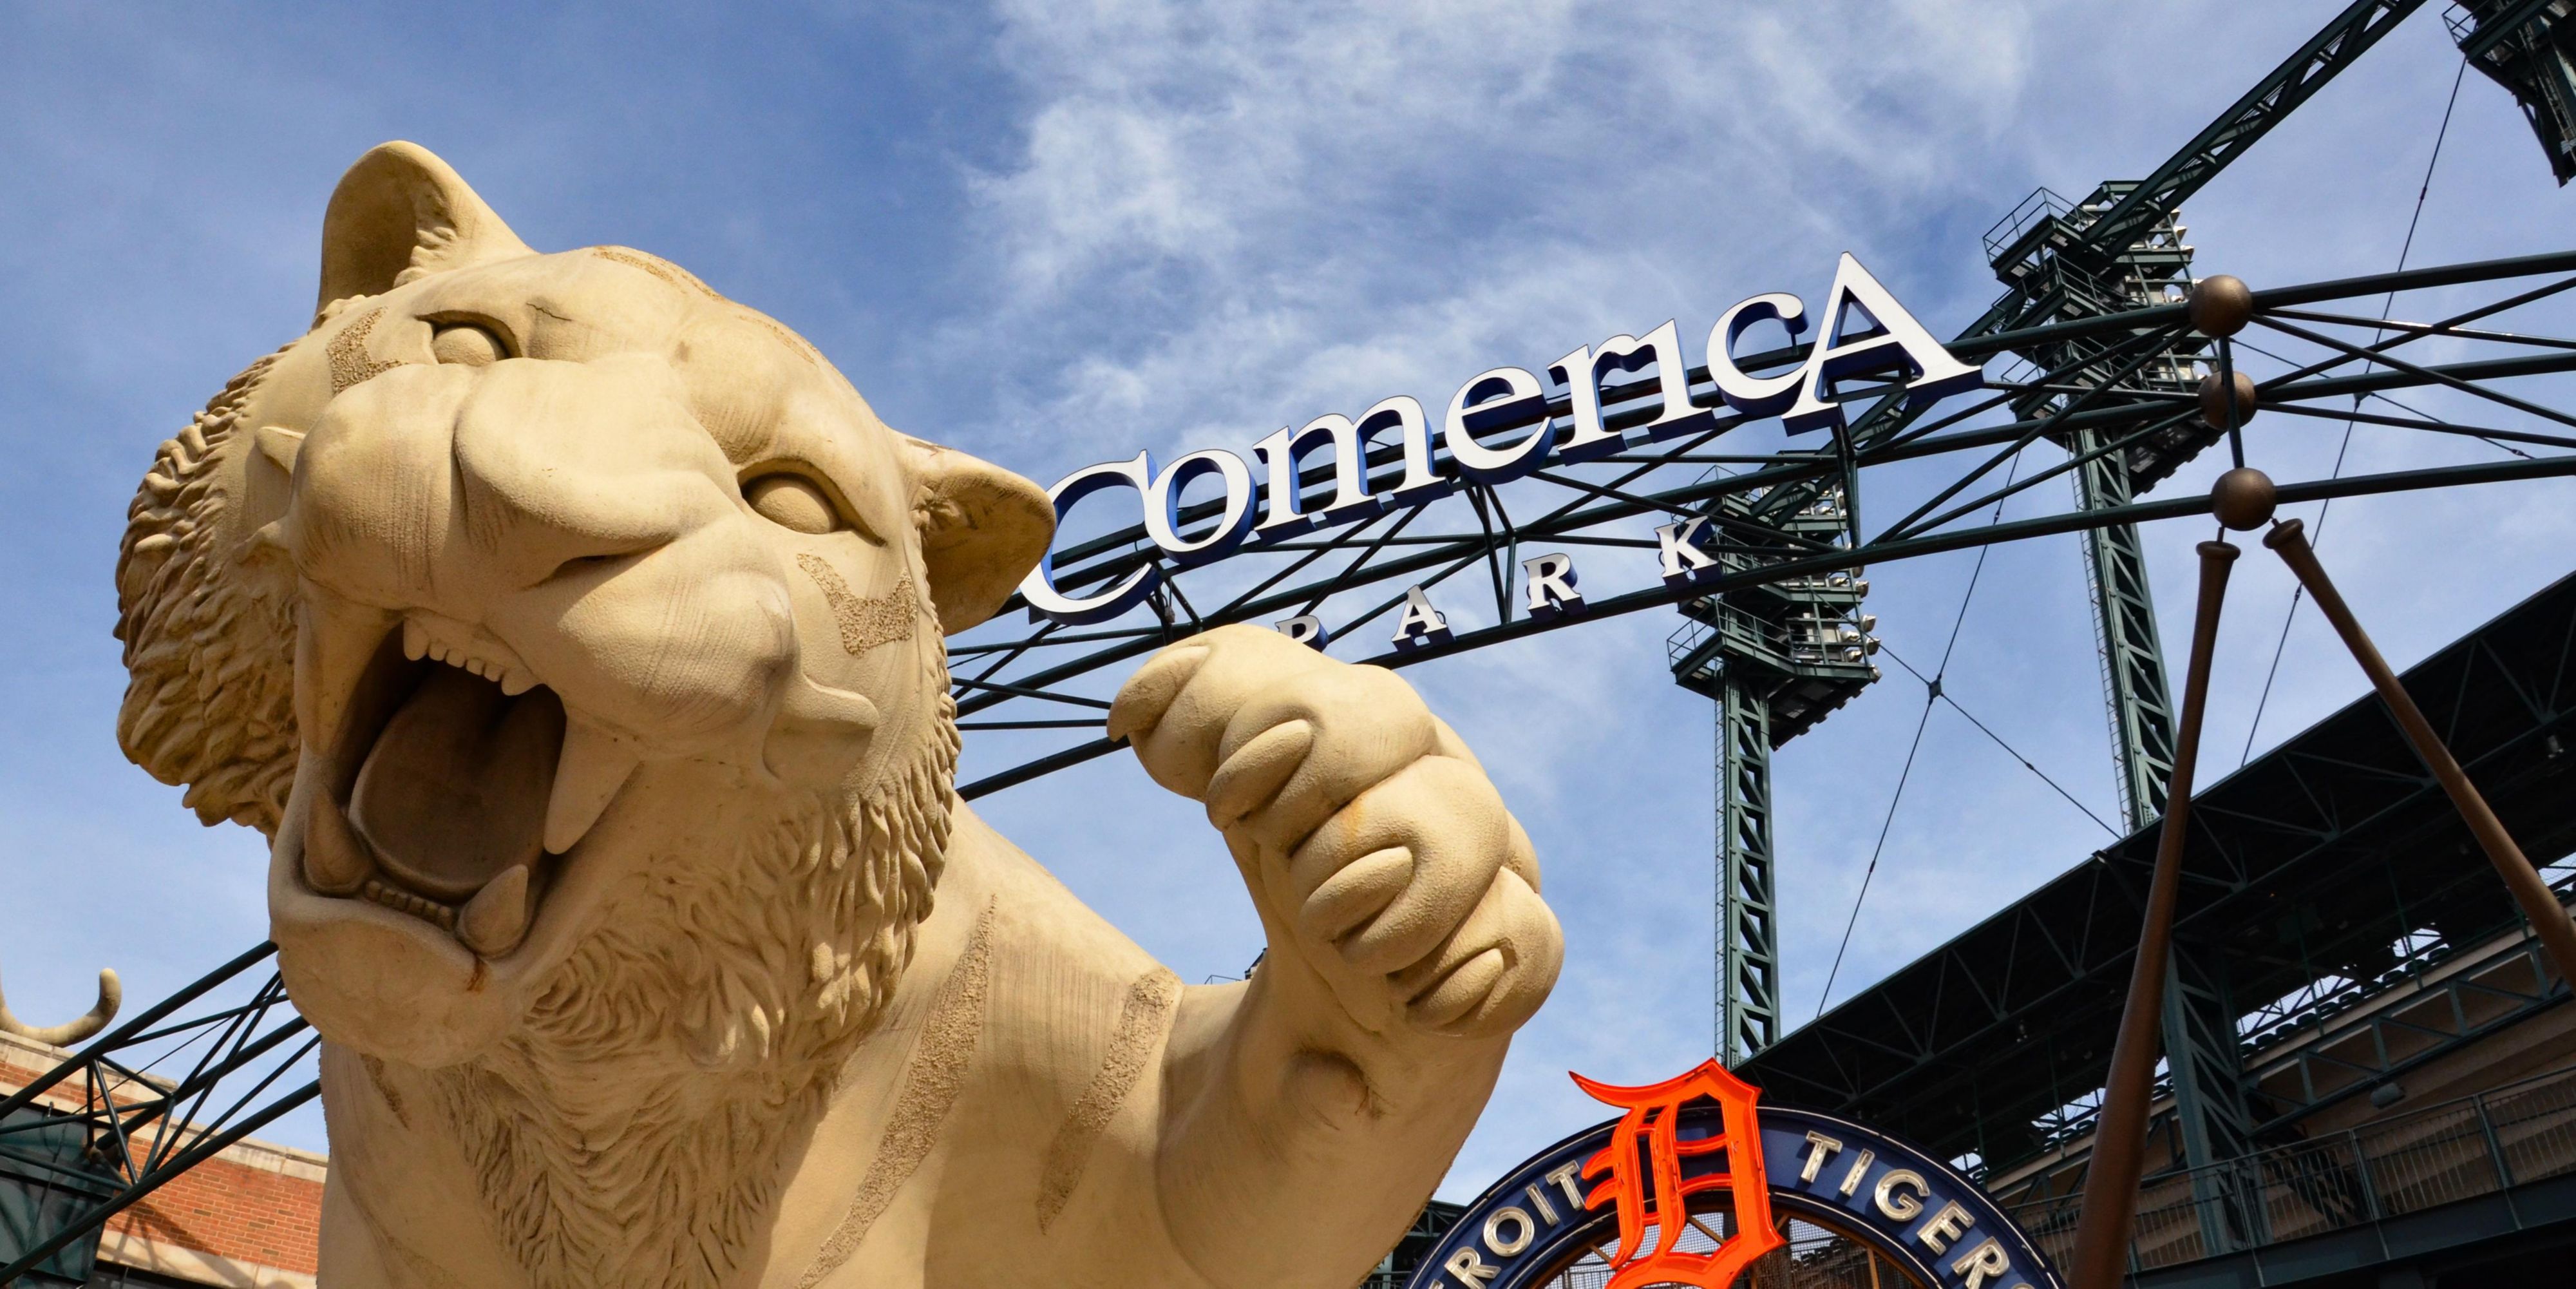 We have a great location from which to base your visit Detroit!  Take in a Detroit Tigers game, attend an event or concert, stroll along the beautiful Detroit Riverwalk, visit the DIA (Detroit Institute of Art), visit the casinos, or people watch and grab a bite as you walk around Greektown and Campus Martius. 